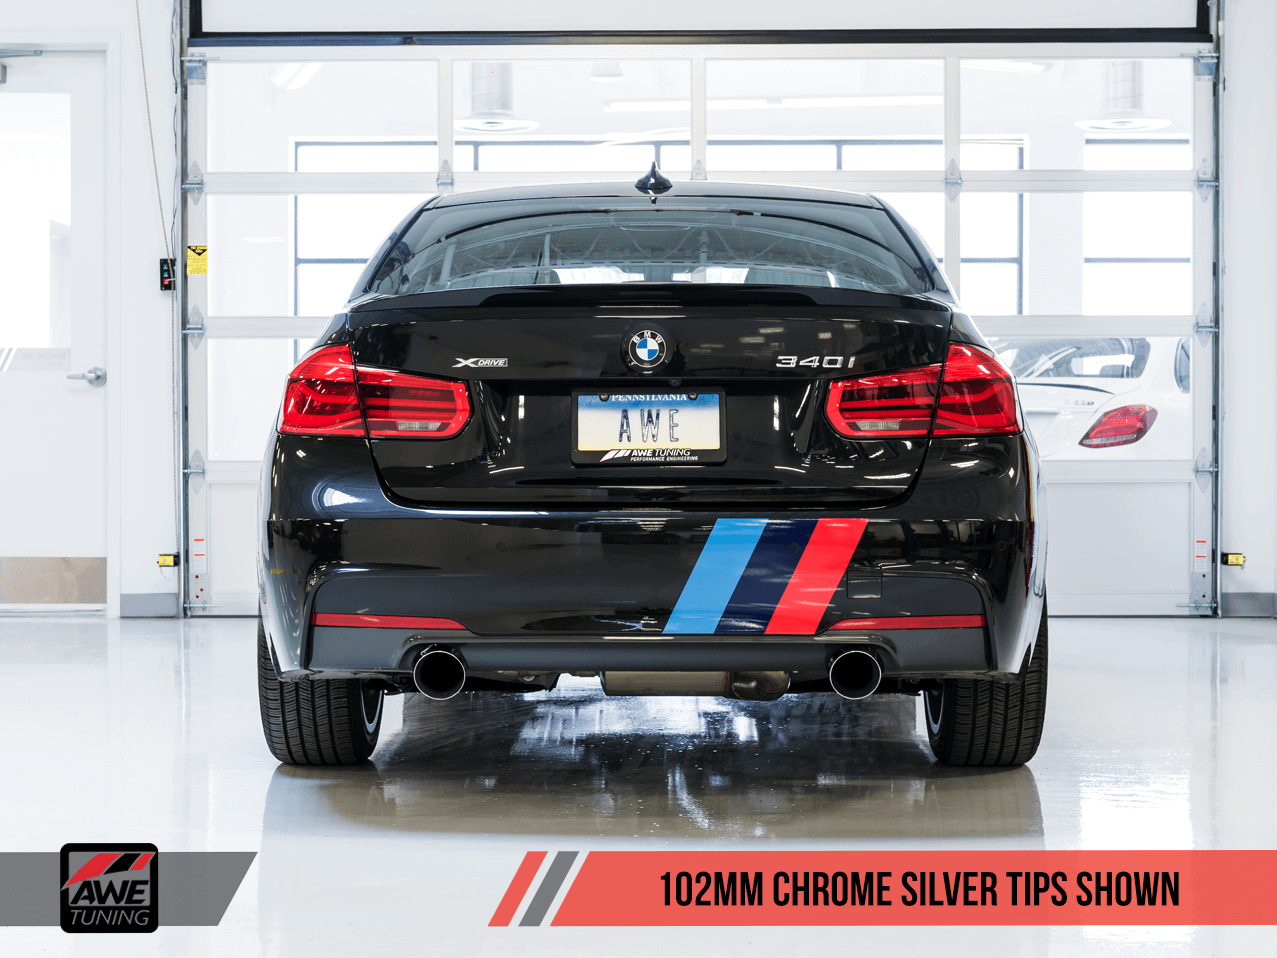 AWE Tuning BMW F30 340i/440i Exhaust Suite - Enhance Your BMW Performance